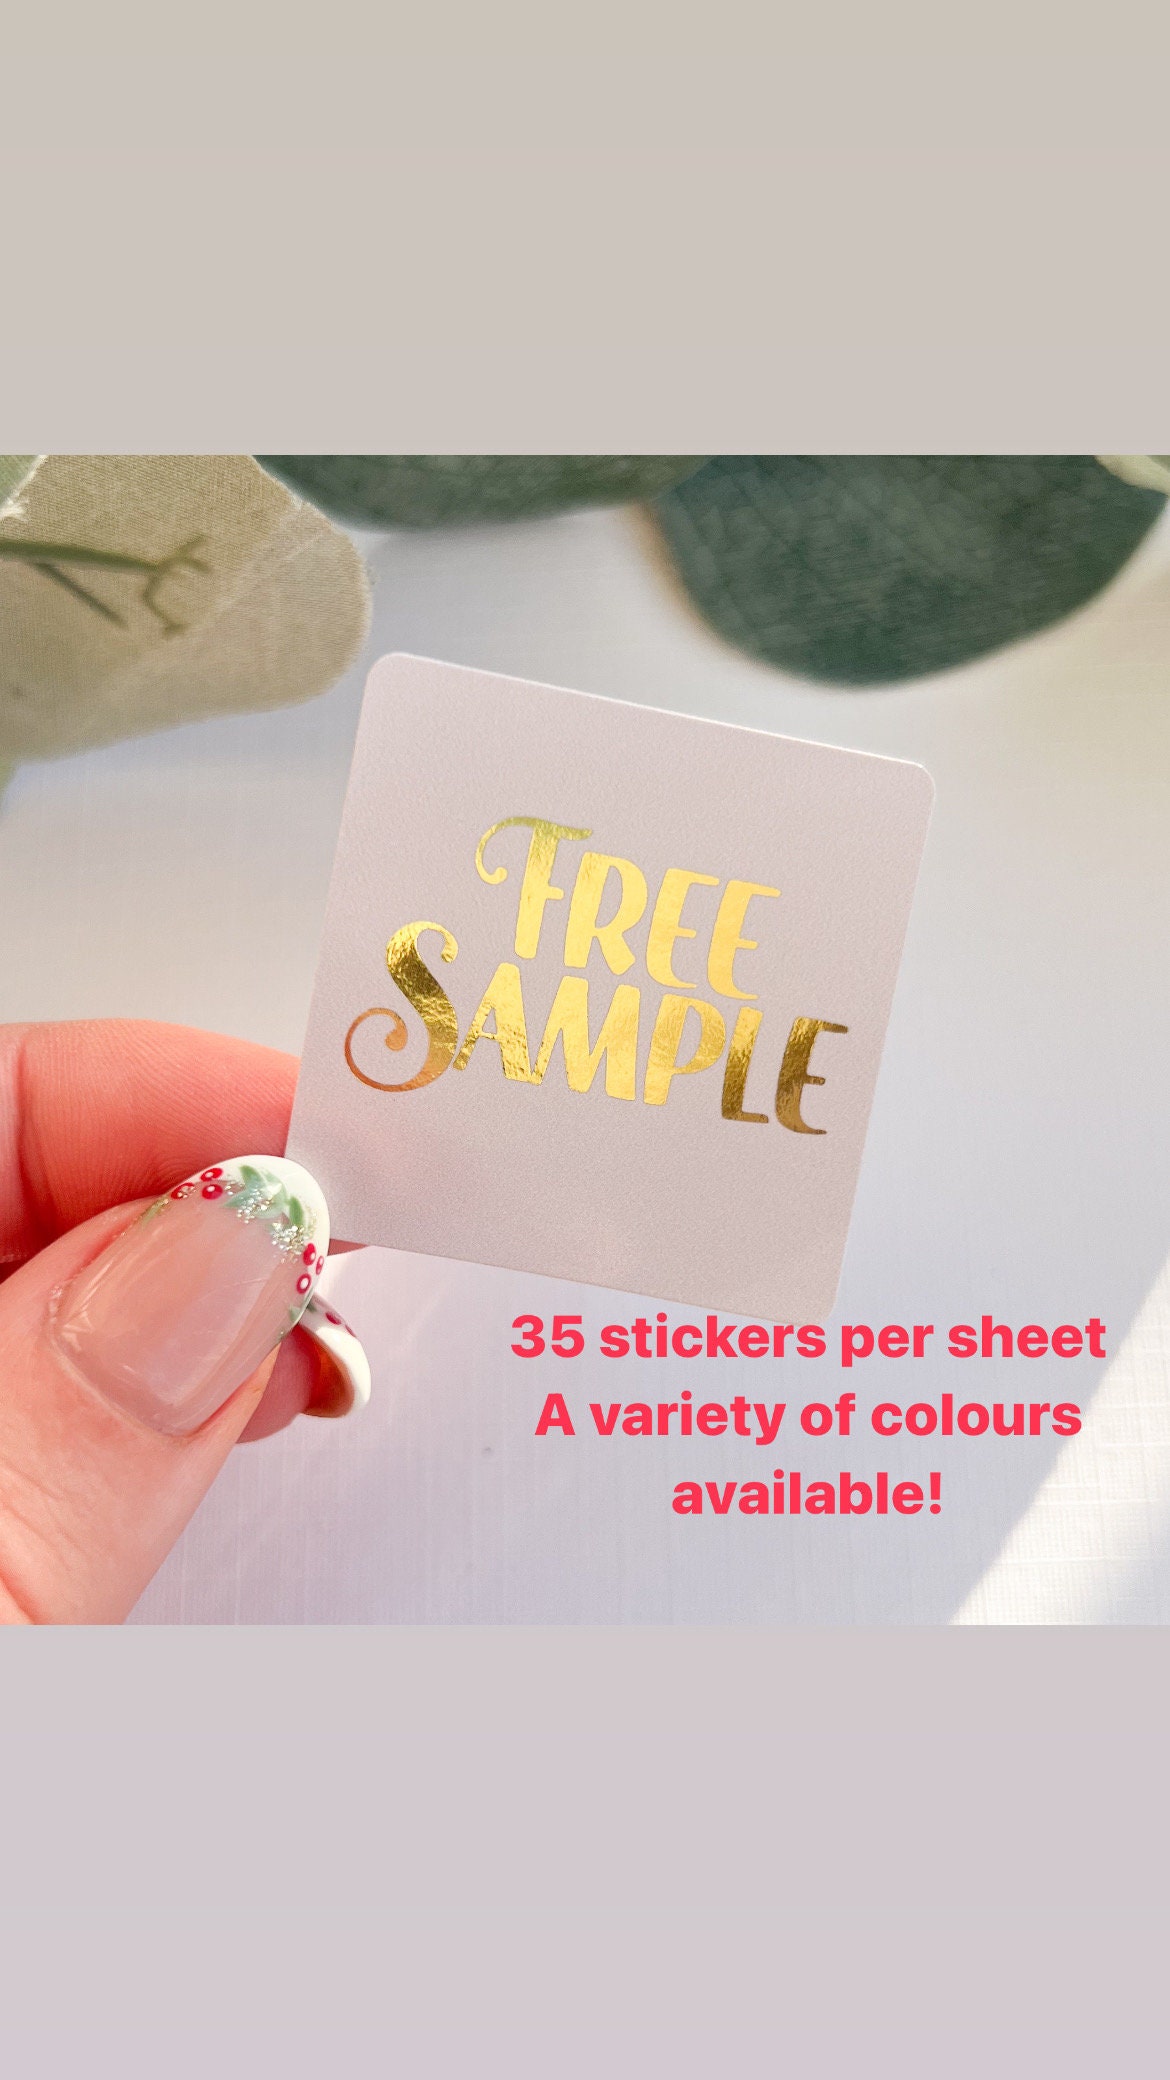 Freebie Stickers, Free Sample Sticker, Small Business Packaging